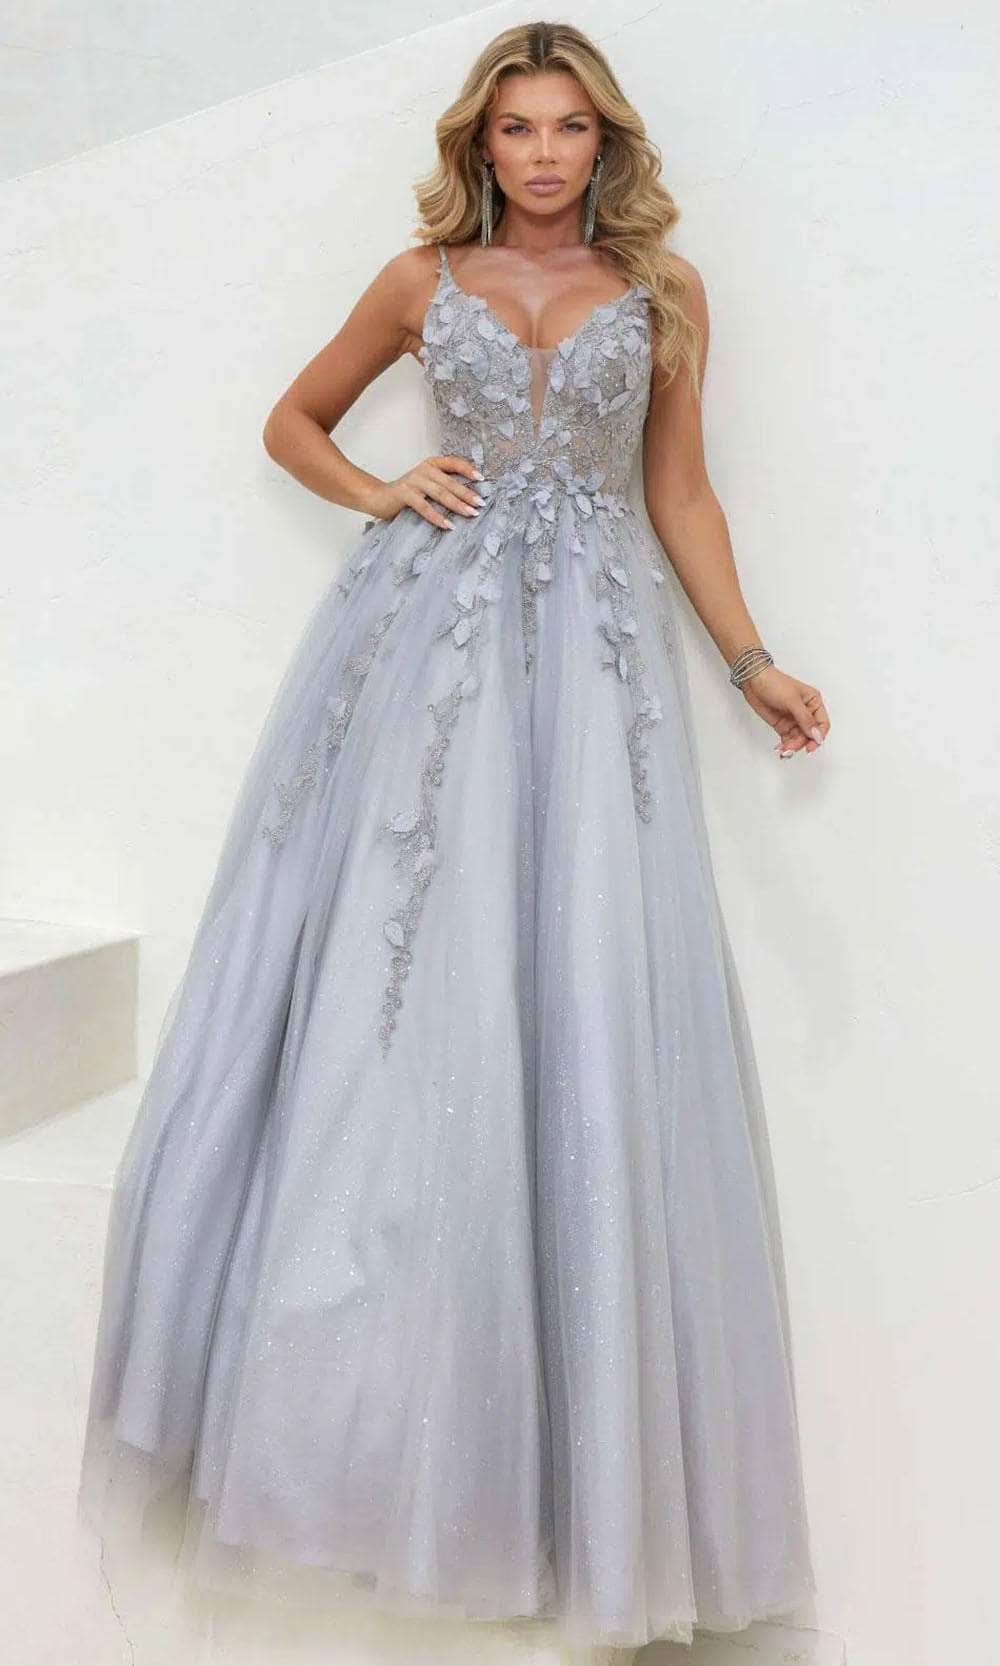 Image of Terani Couture 241P2281 - Beaded Applique Prom Dress